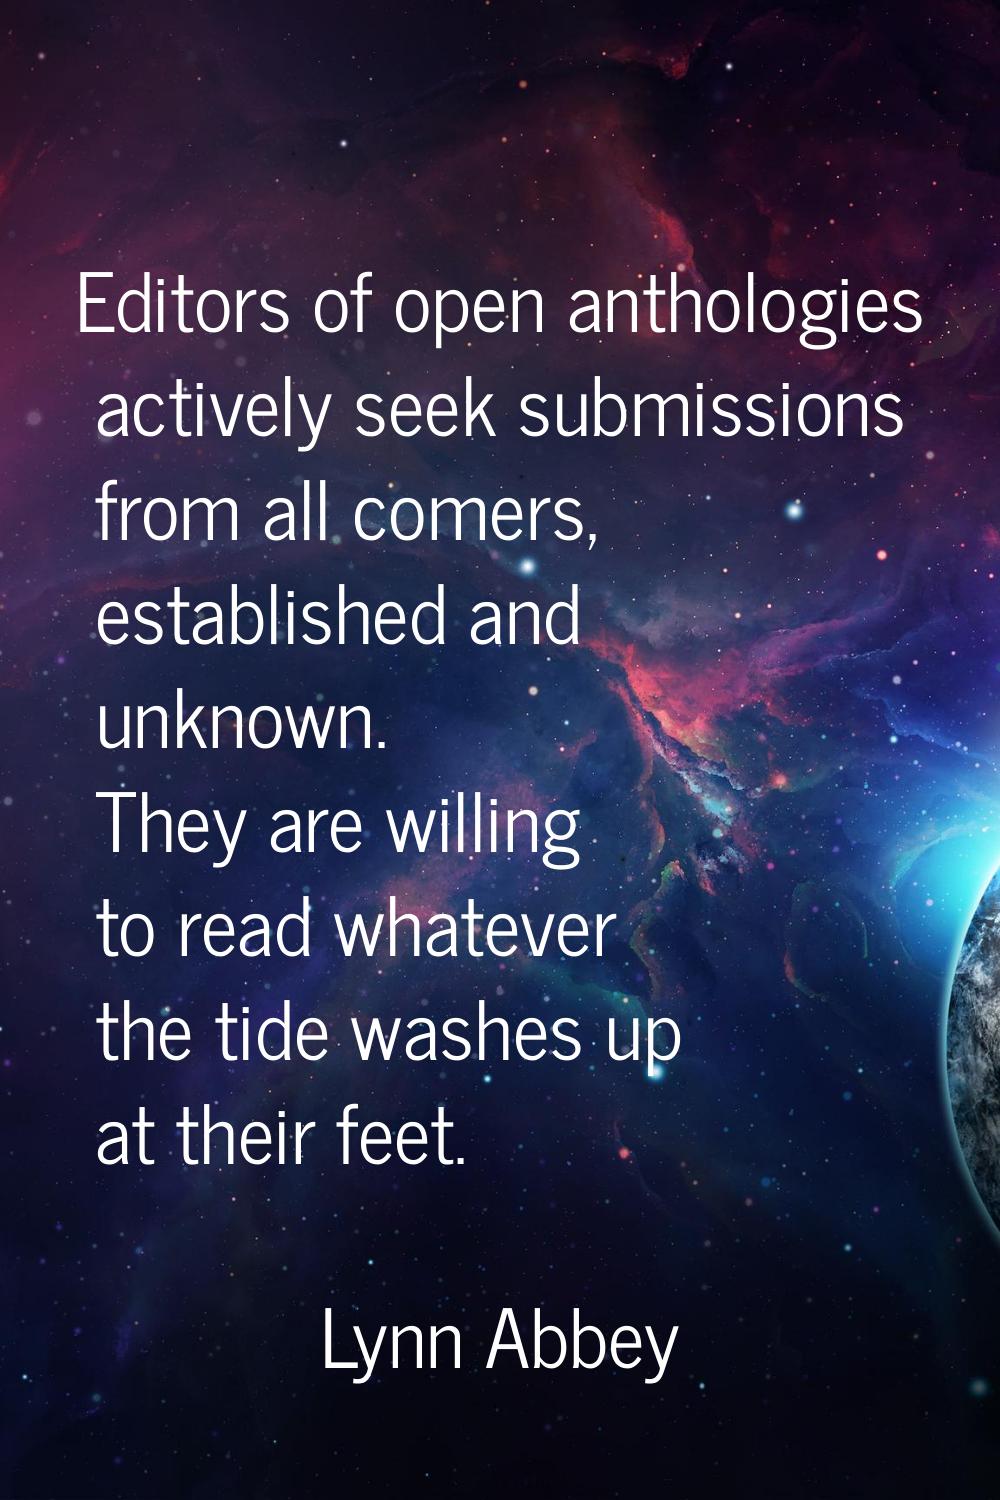 Editors of open anthologies actively seek submissions from all comers, established and unknown. The